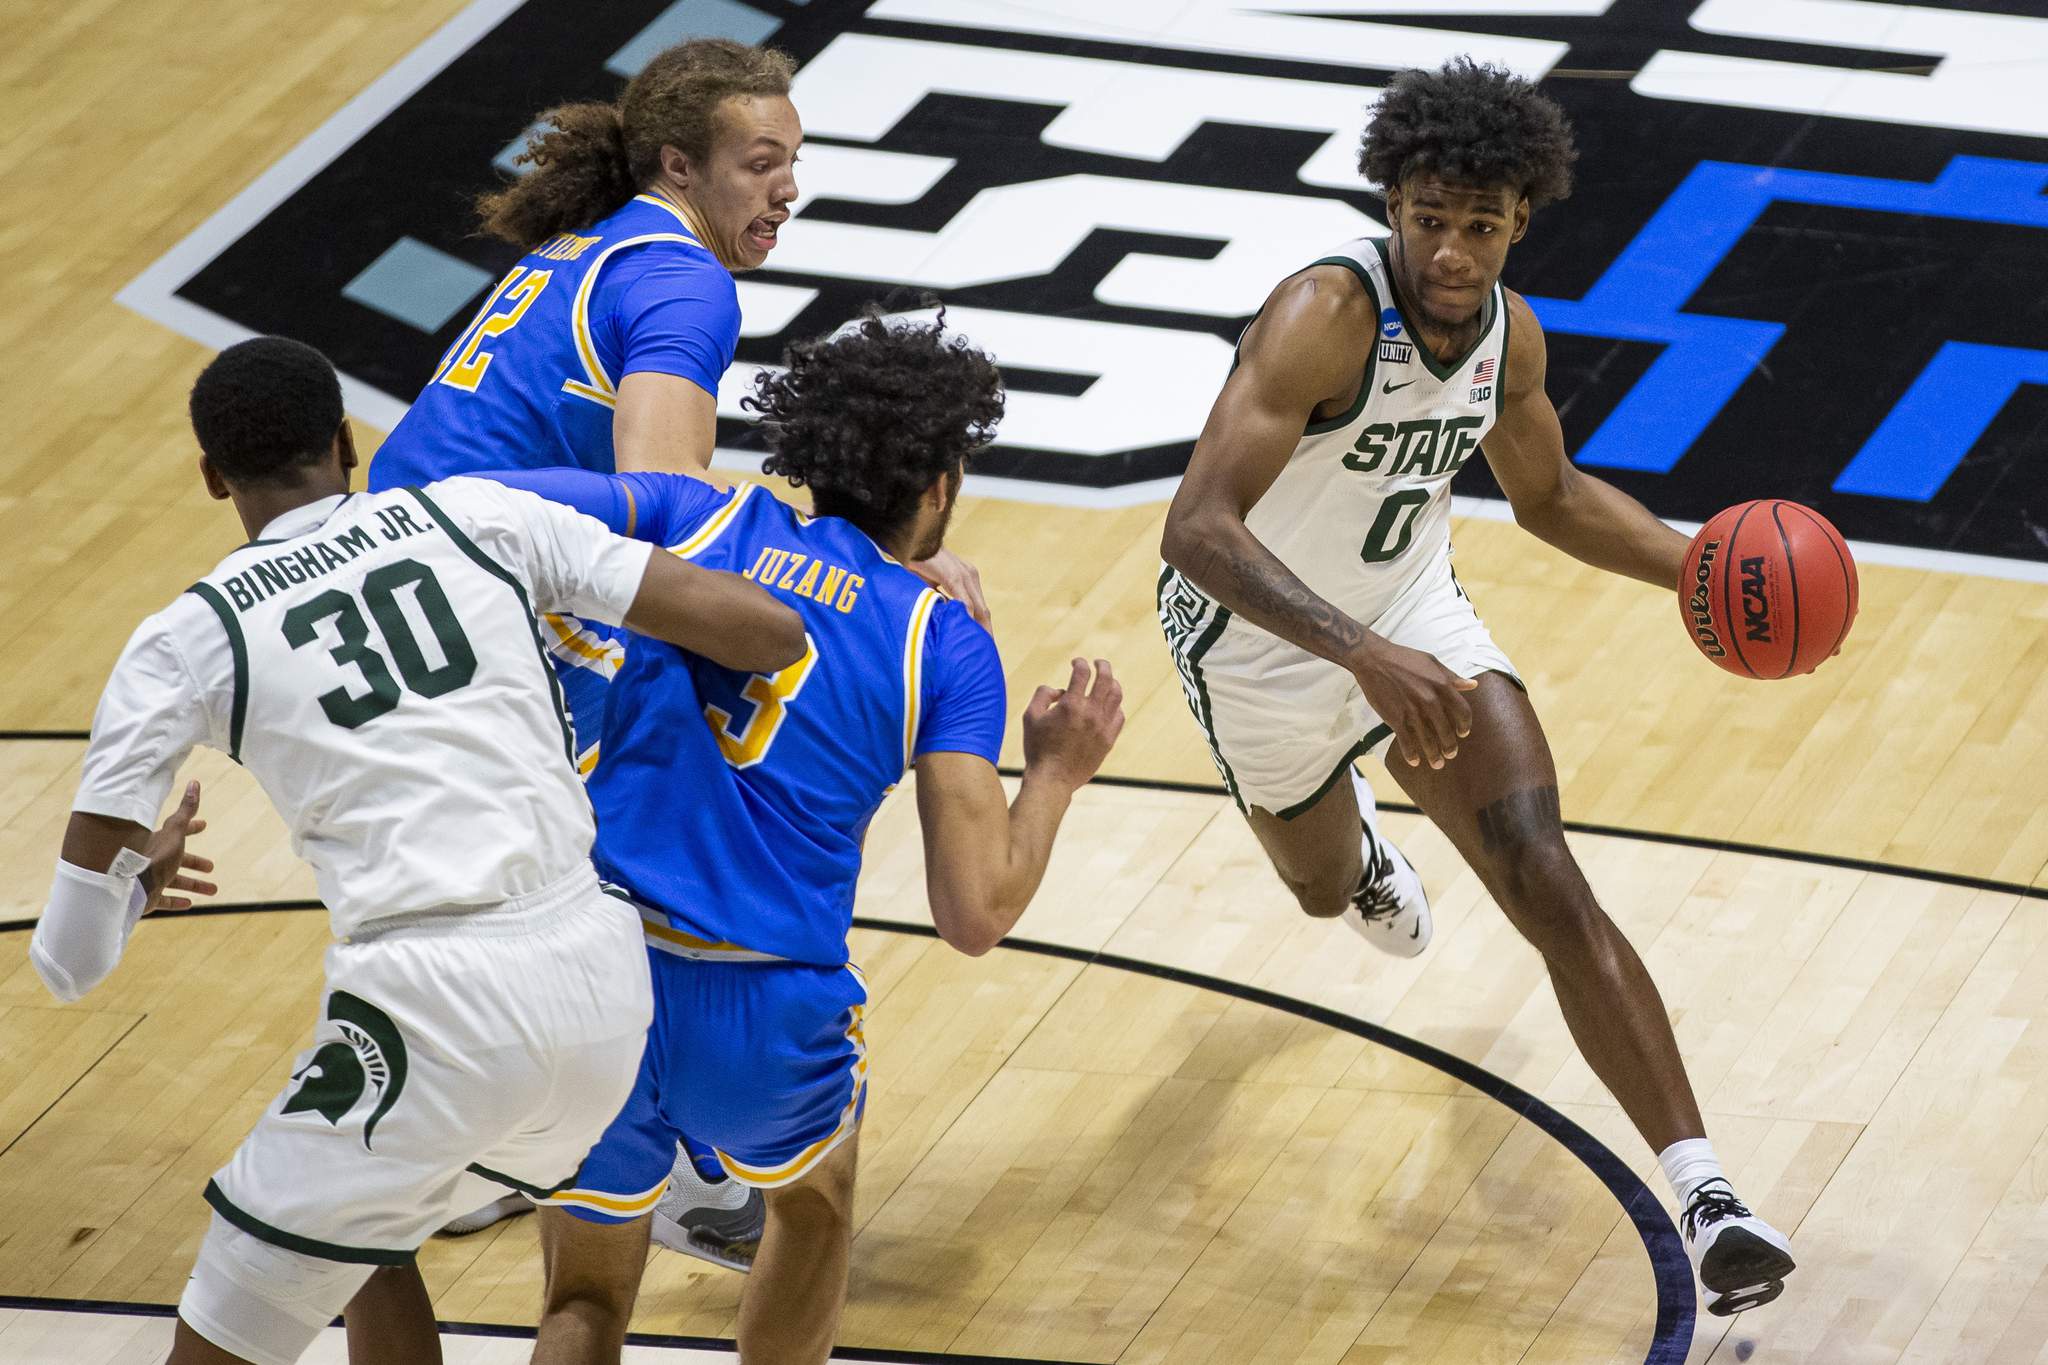 UCLA beats Michigan St 86-80 in overtime in First Four game